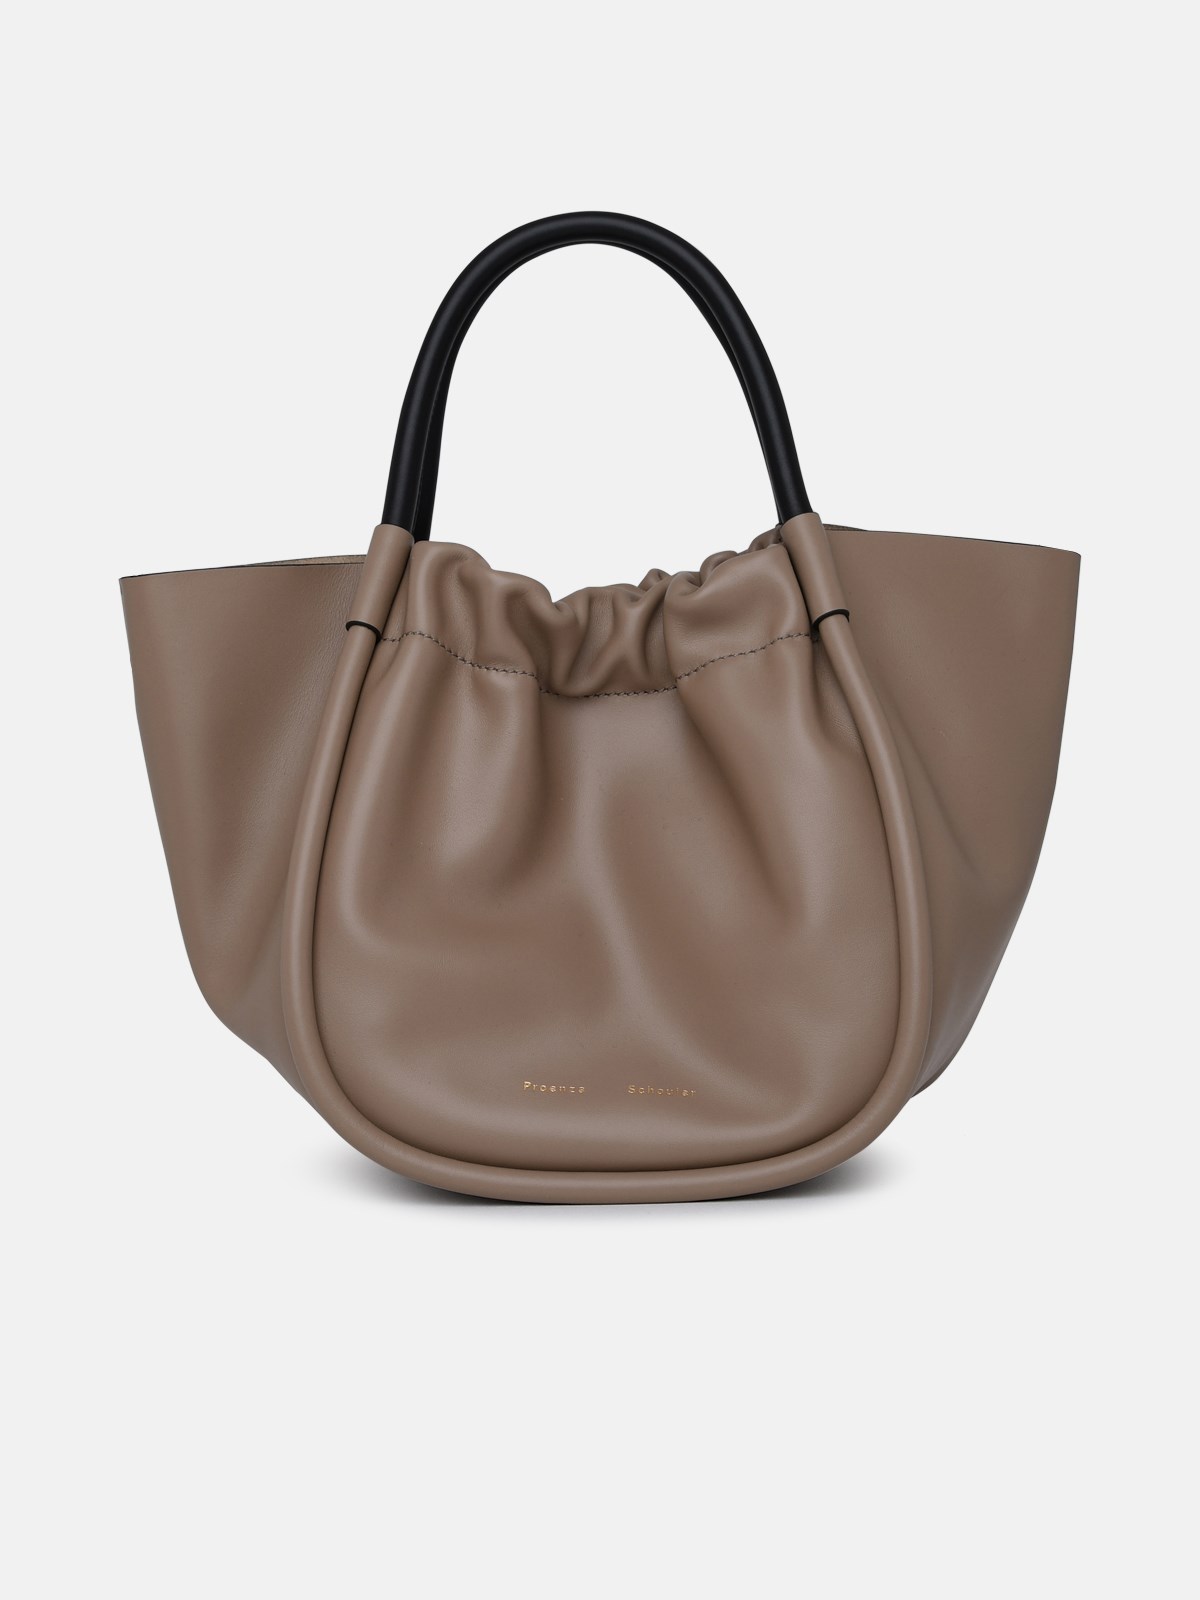 Proenza Schouler Beige Leather Ruched Bag